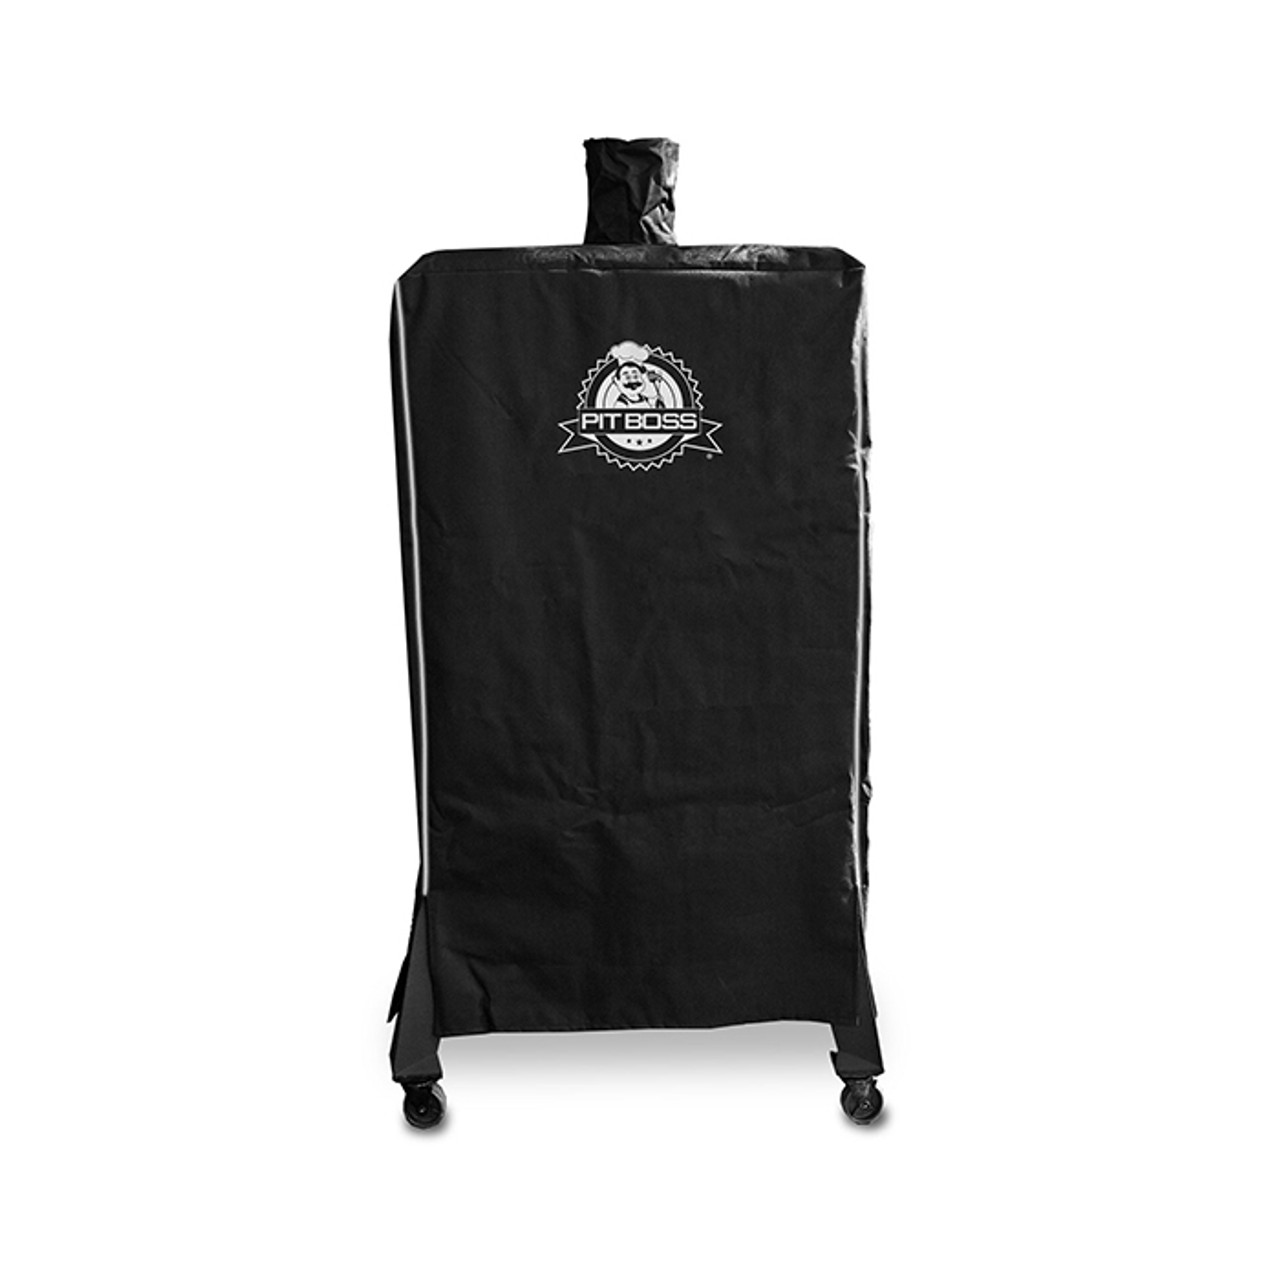 Pro 4 Series Vertical Smoker Grill Cover *in-store